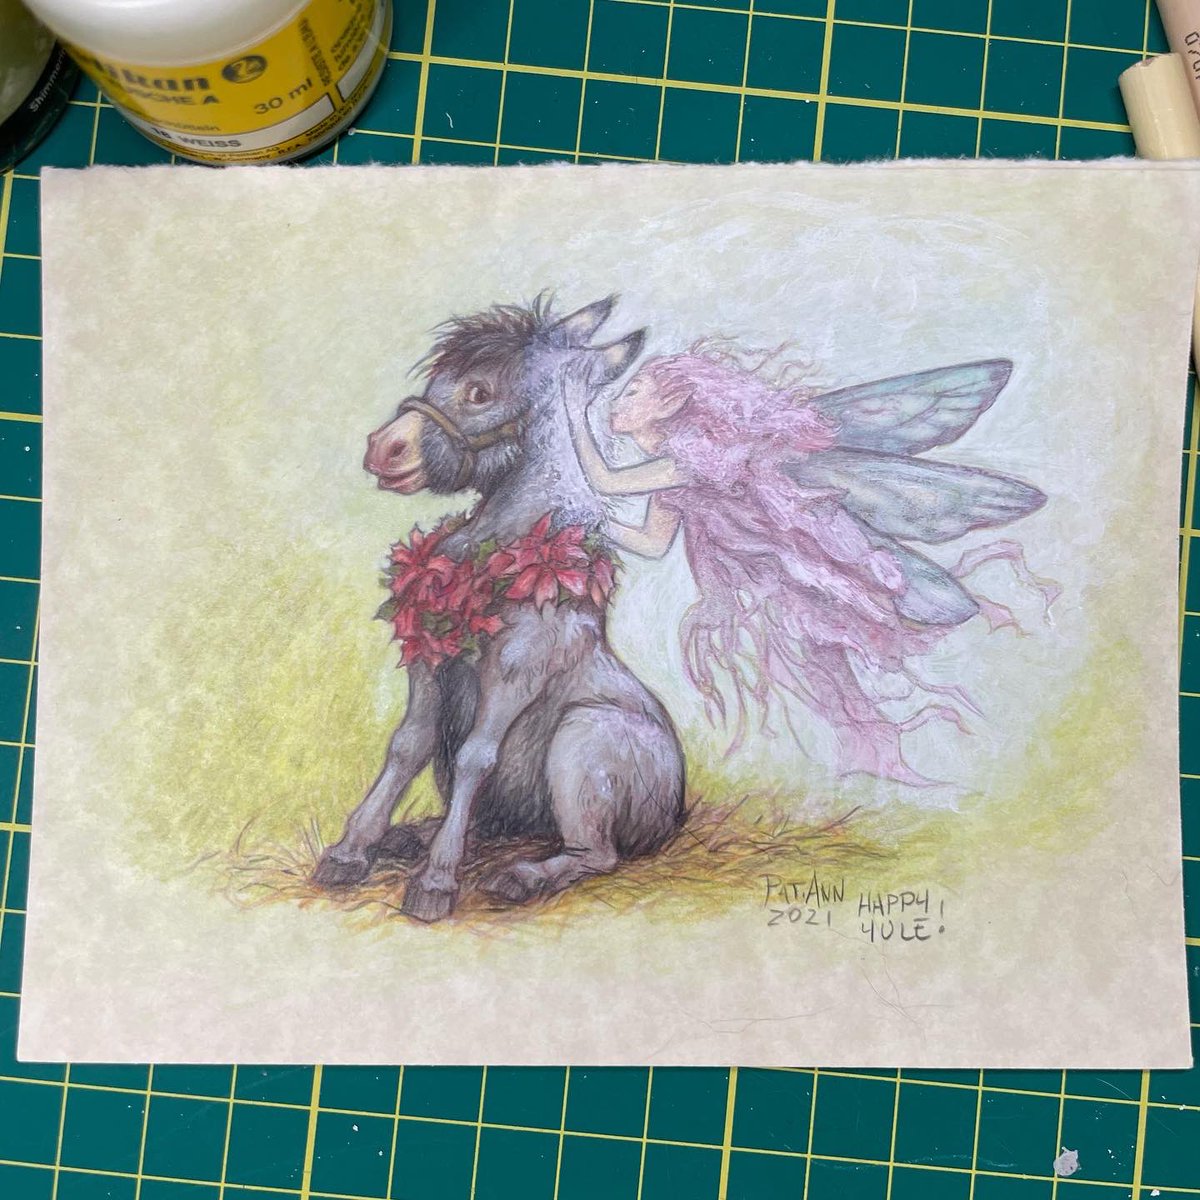 My Christmas Card for 2021 is a drawing that I did back in 2004 called, “Jenny and the Fae of Good Tidings.”  It was in need of a fix up so  I… fixed it up.  (This one is a gift for a friend in the US but I will be making Christmas cards with it.) https://t.co/JU15GzQrhI